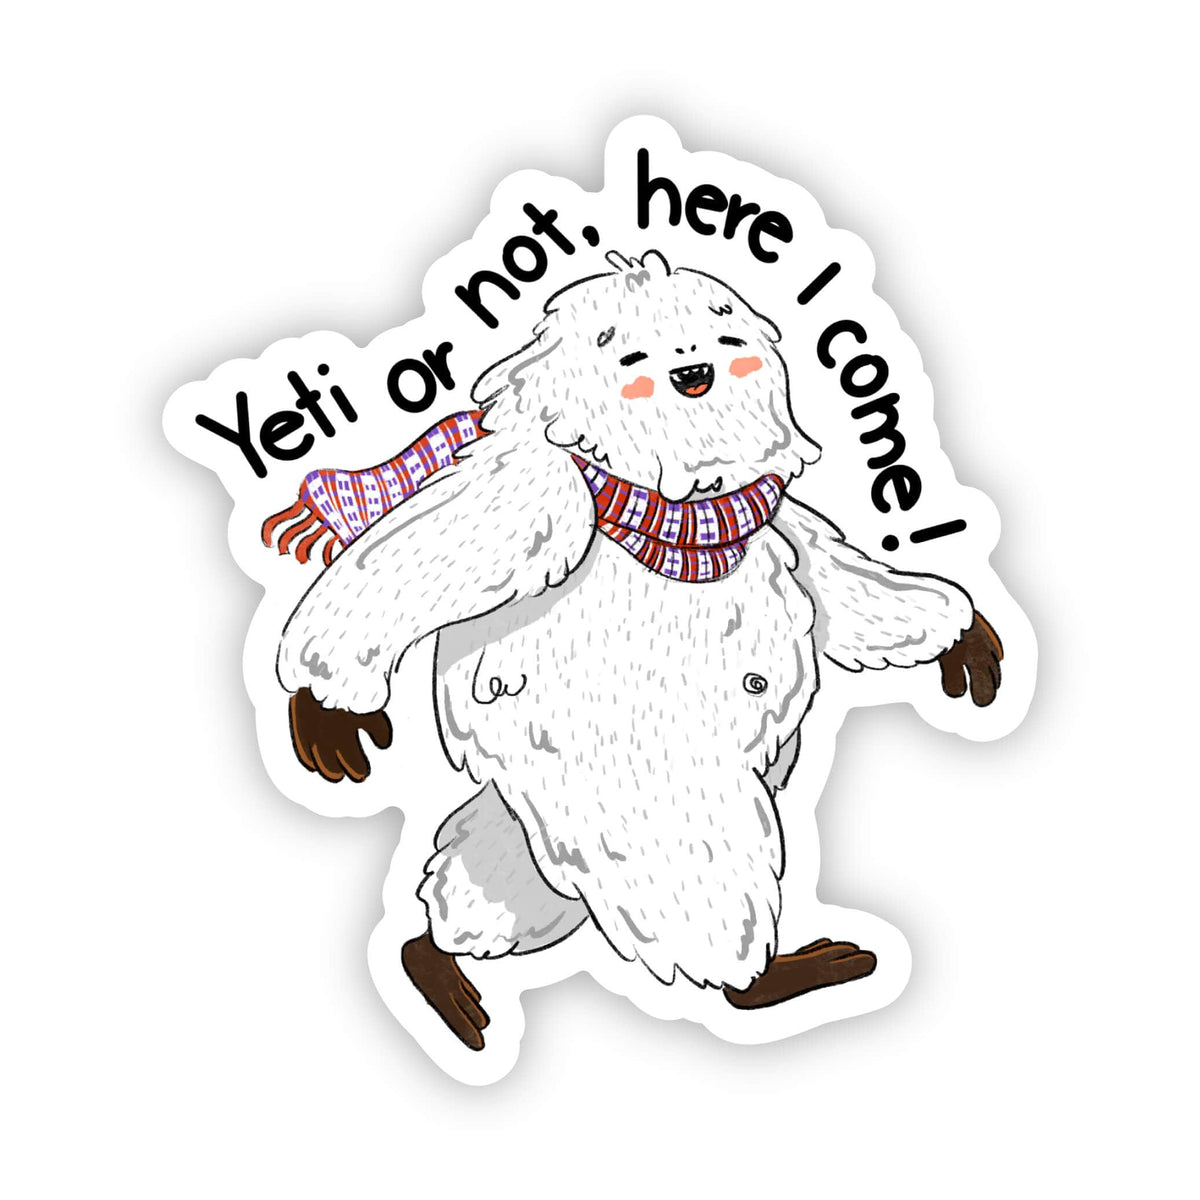 &quot;Yeti or not, here I come&quot; sticker